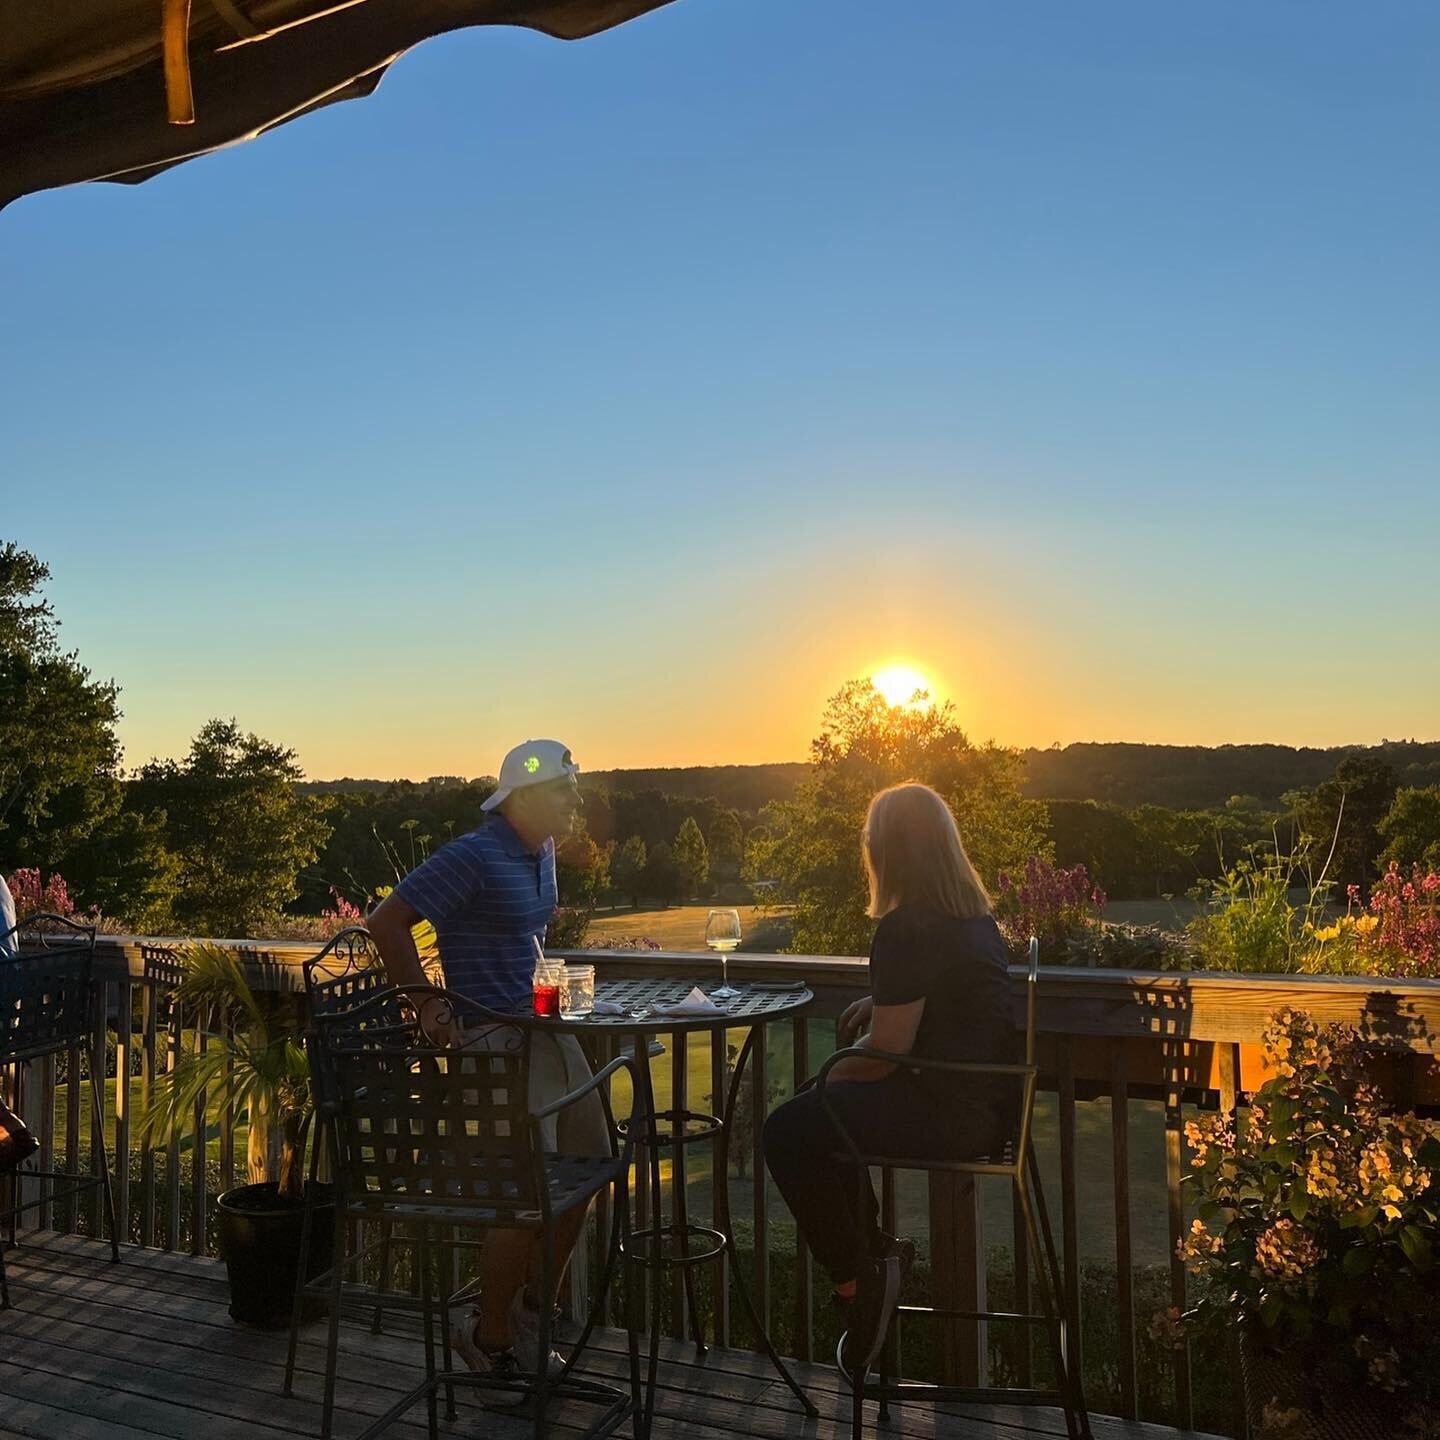 Looking for a place to enjoy the ☀️☀️☀️ this week?

Bring your family to Odeens BBQ at Ridgefield Public Golf Course. 

Enjoy the spring break vacay feeling without ever leaving town. 

#odeensbbq #ridgefieldct #ridgefieldmoms #bbq #ctrestaurants #ct